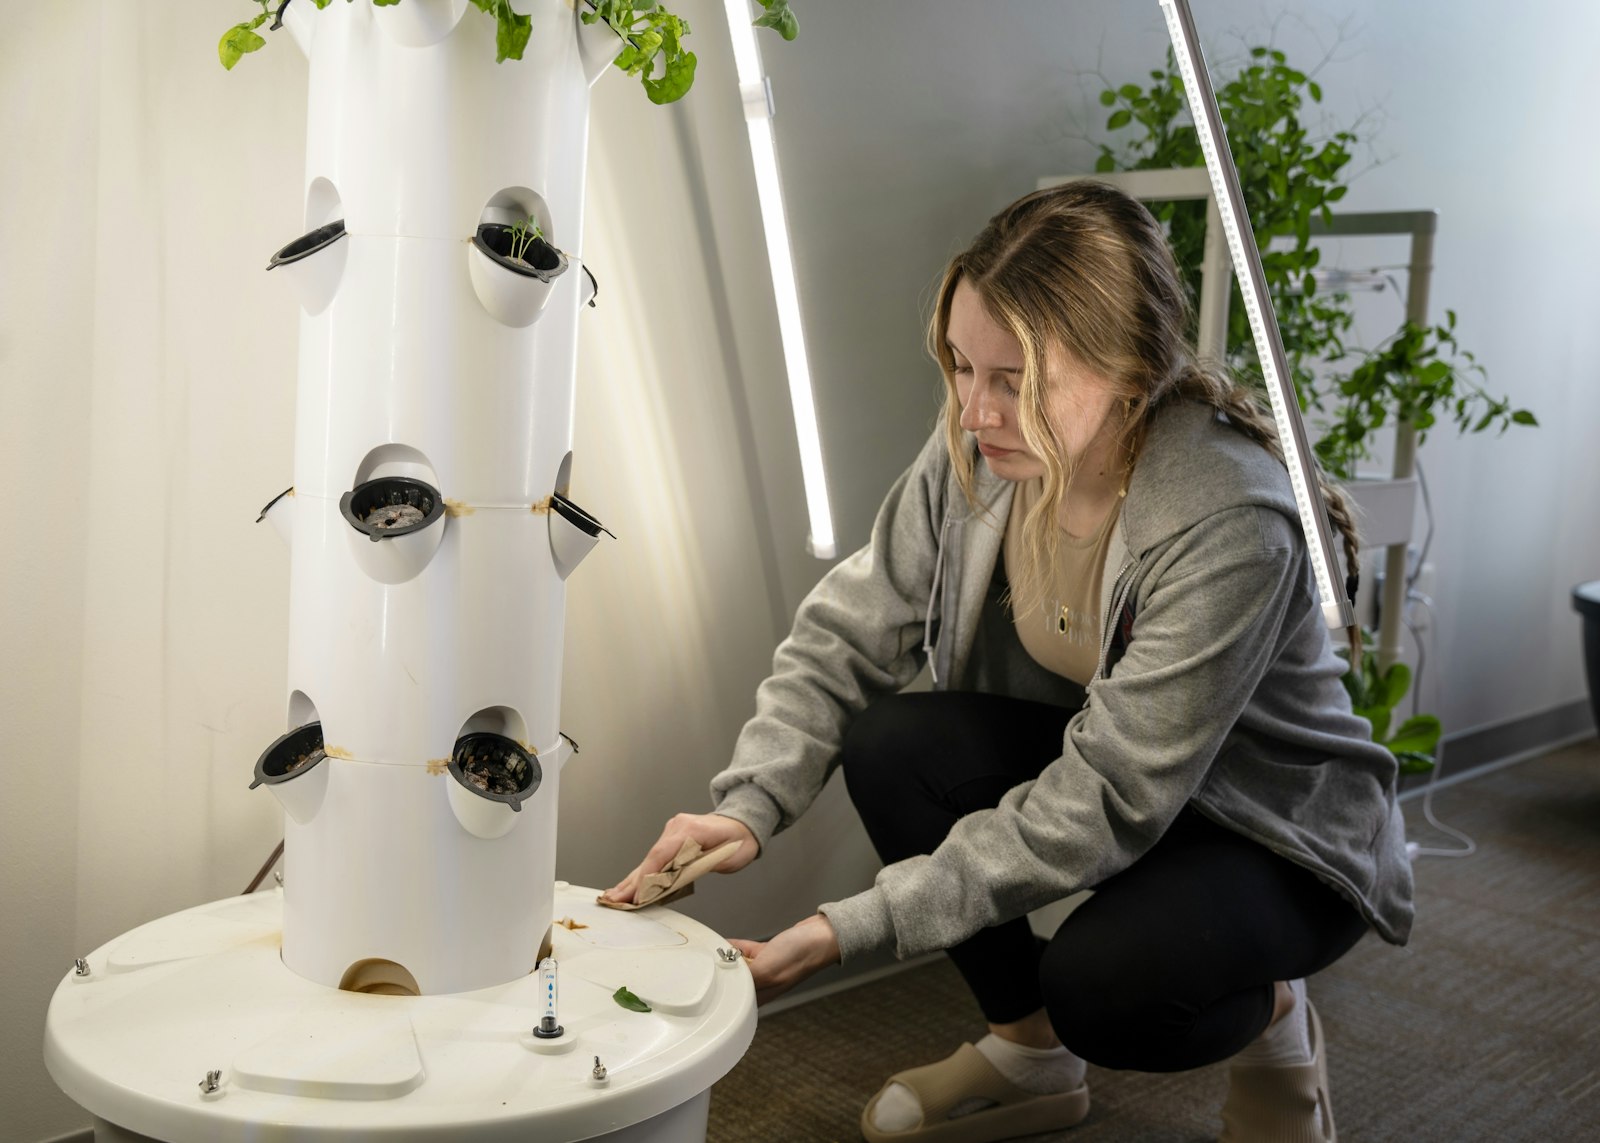 Liberty Booth, a junior, cleans up around the aeroponics garden tower before harvesting the vegetables.